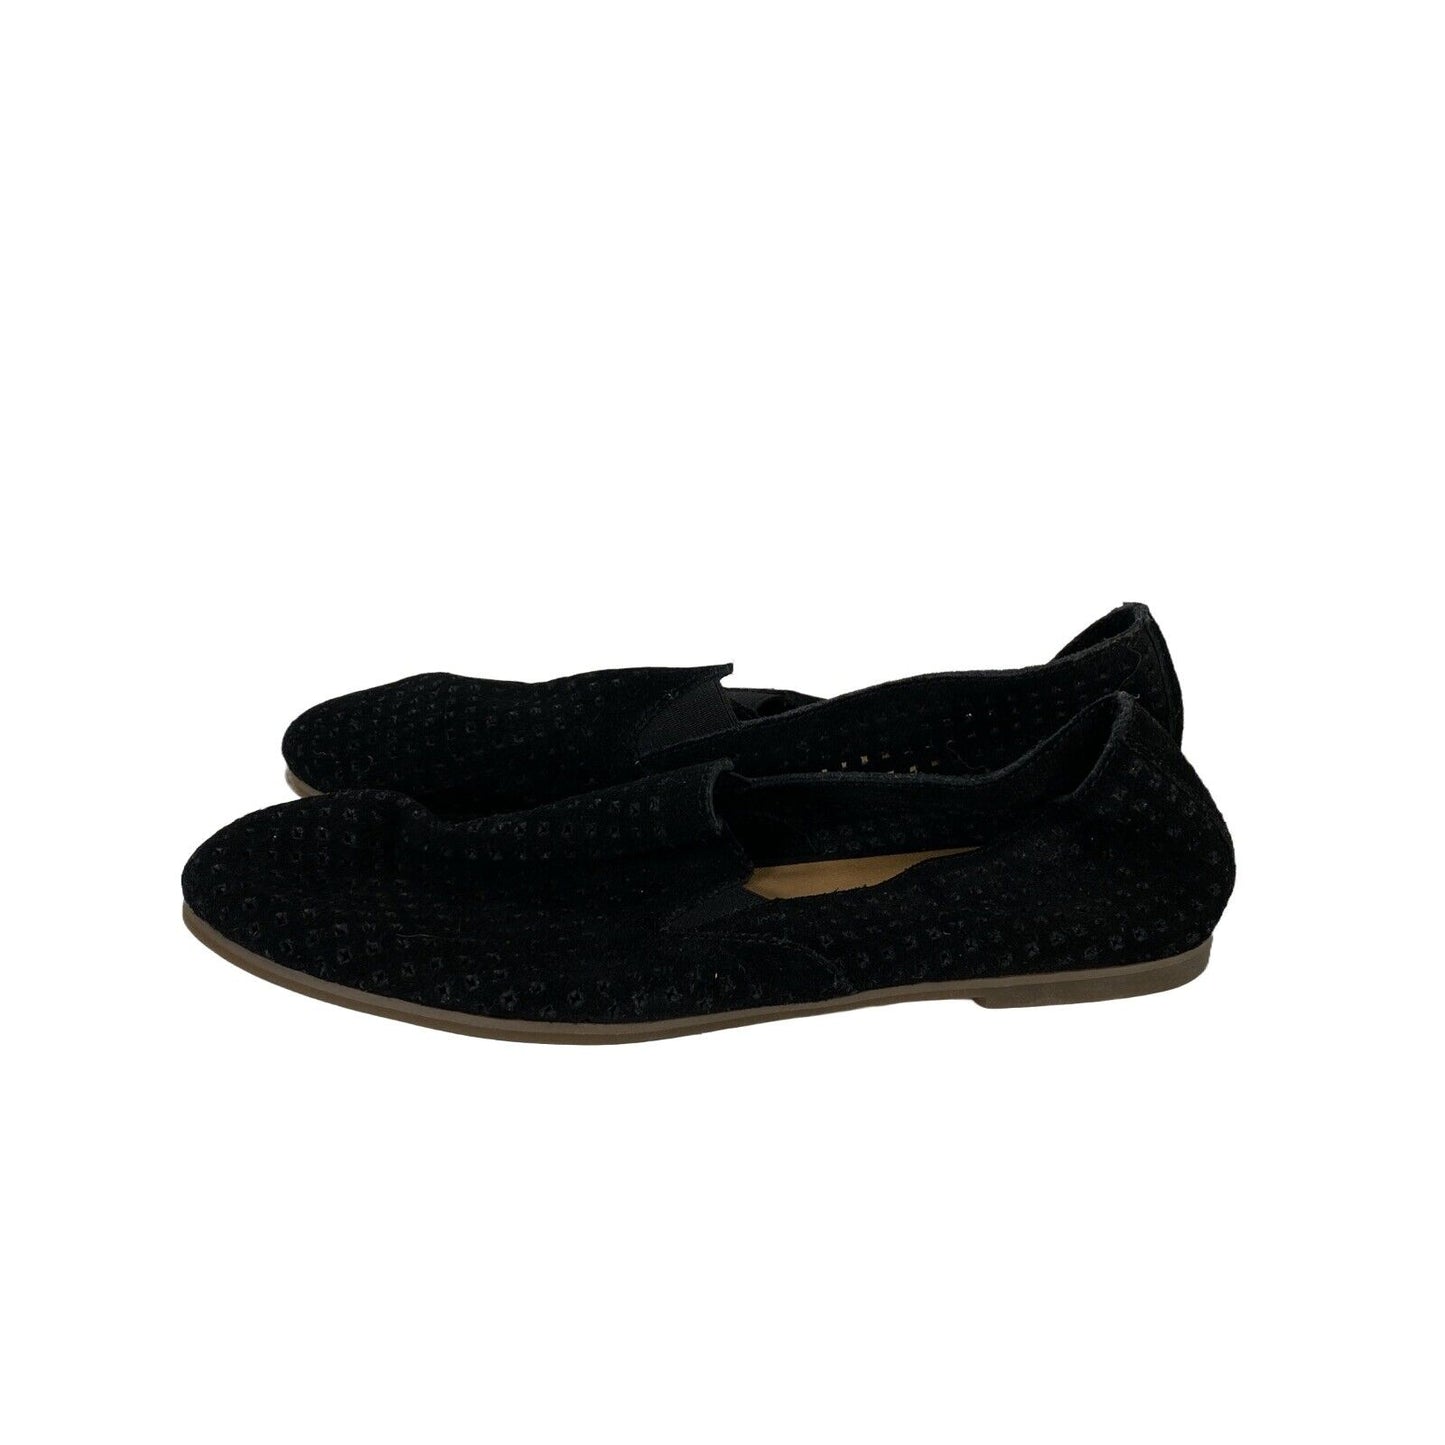 NEW Lucky Brand Women's Black Suede Carthy Loafer Flats - 8